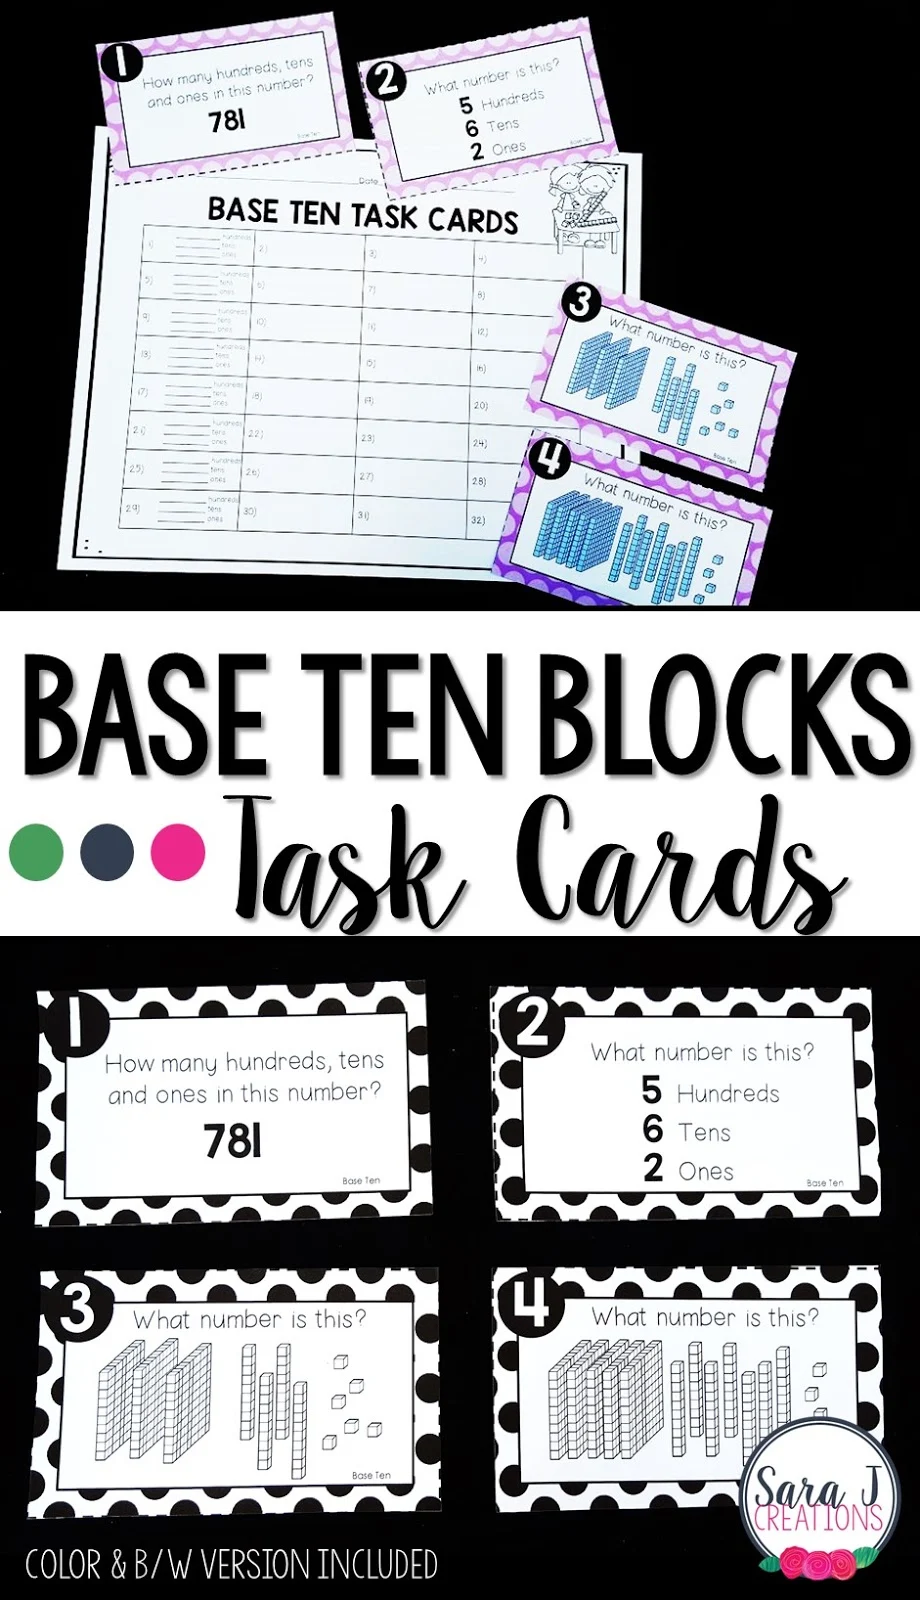 Base ten task cards - a practicing place value activity for 2nd grade